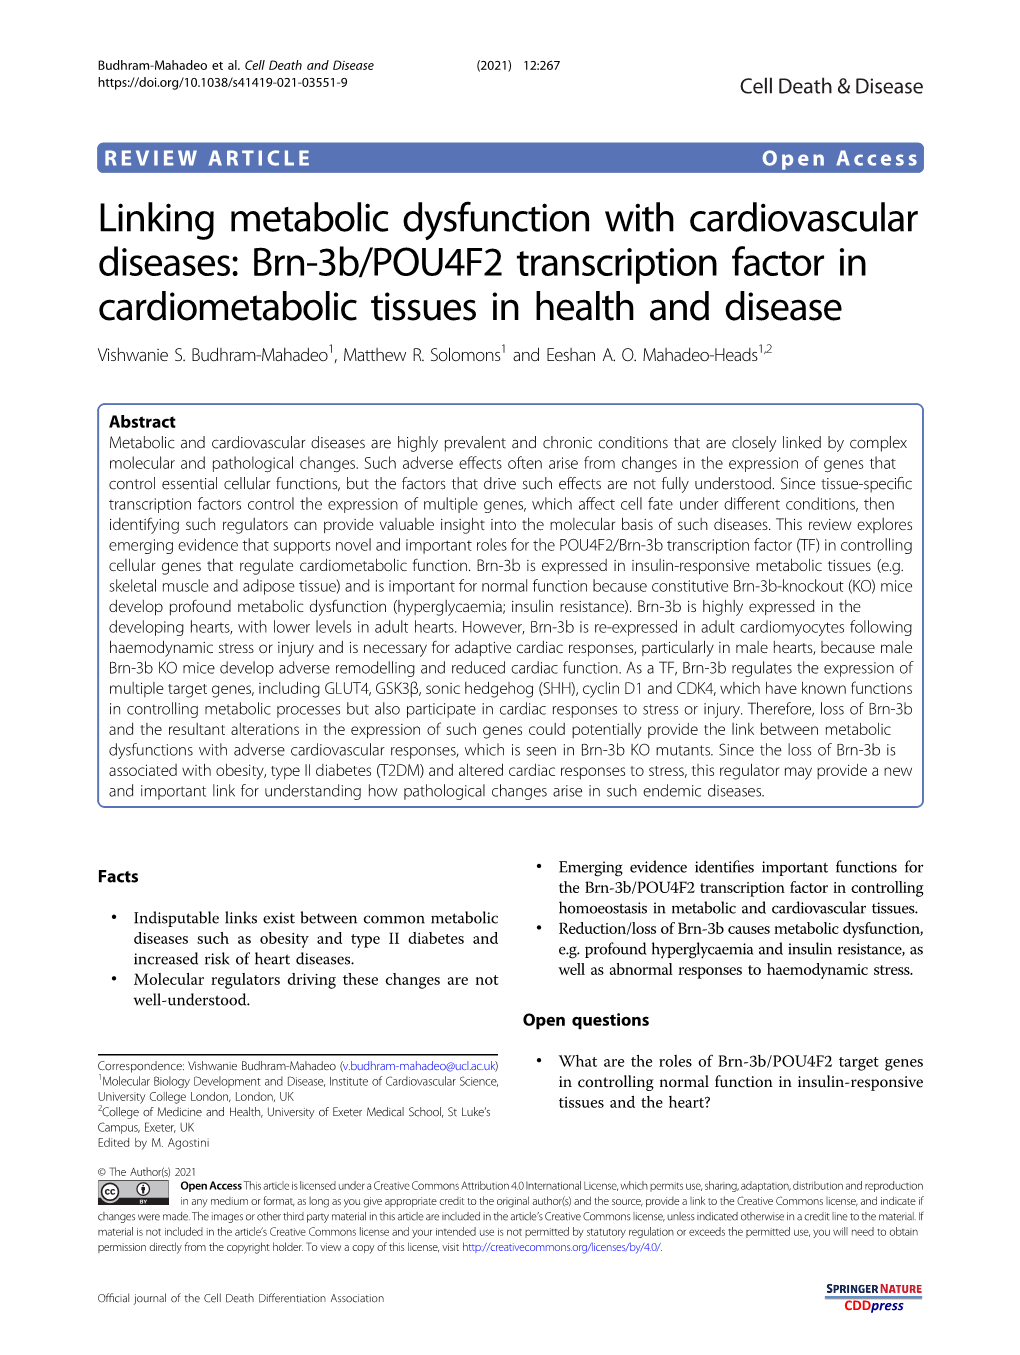 Linking Metabolic Dysfunction with Cardiovascular Diseases: Brn-3B/POU4F2 Transcription Factor in Cardiometabolic Tissues in Health and Disease Vishwanie S